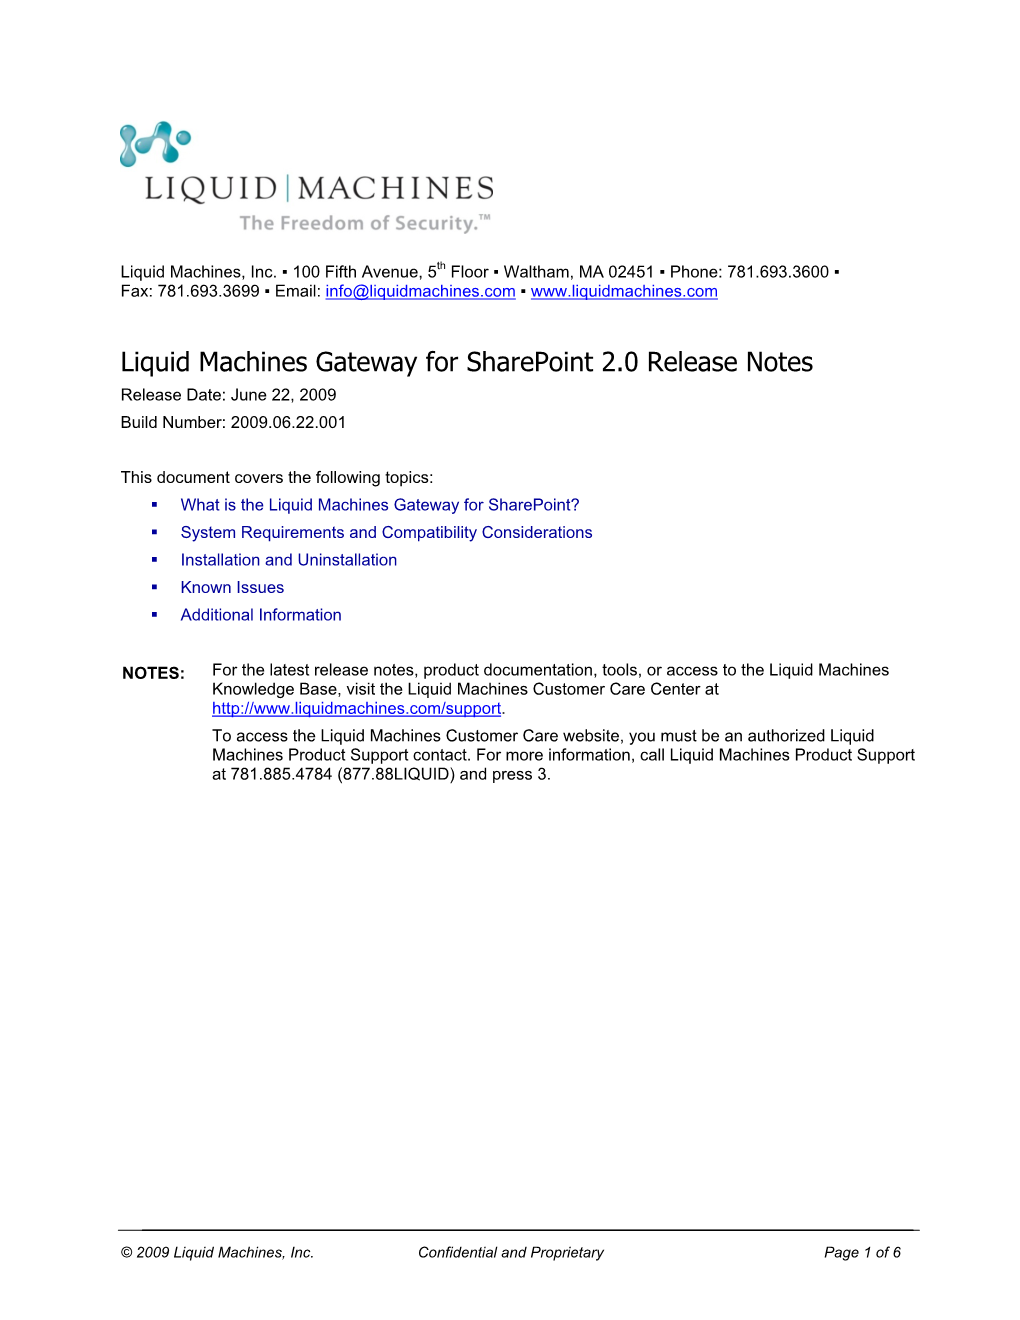 Liquid Machines Gateway for Sharepoint 2.0 Release Notes Release Date: June 22, 2009 Build Number: 2009.06.22.001